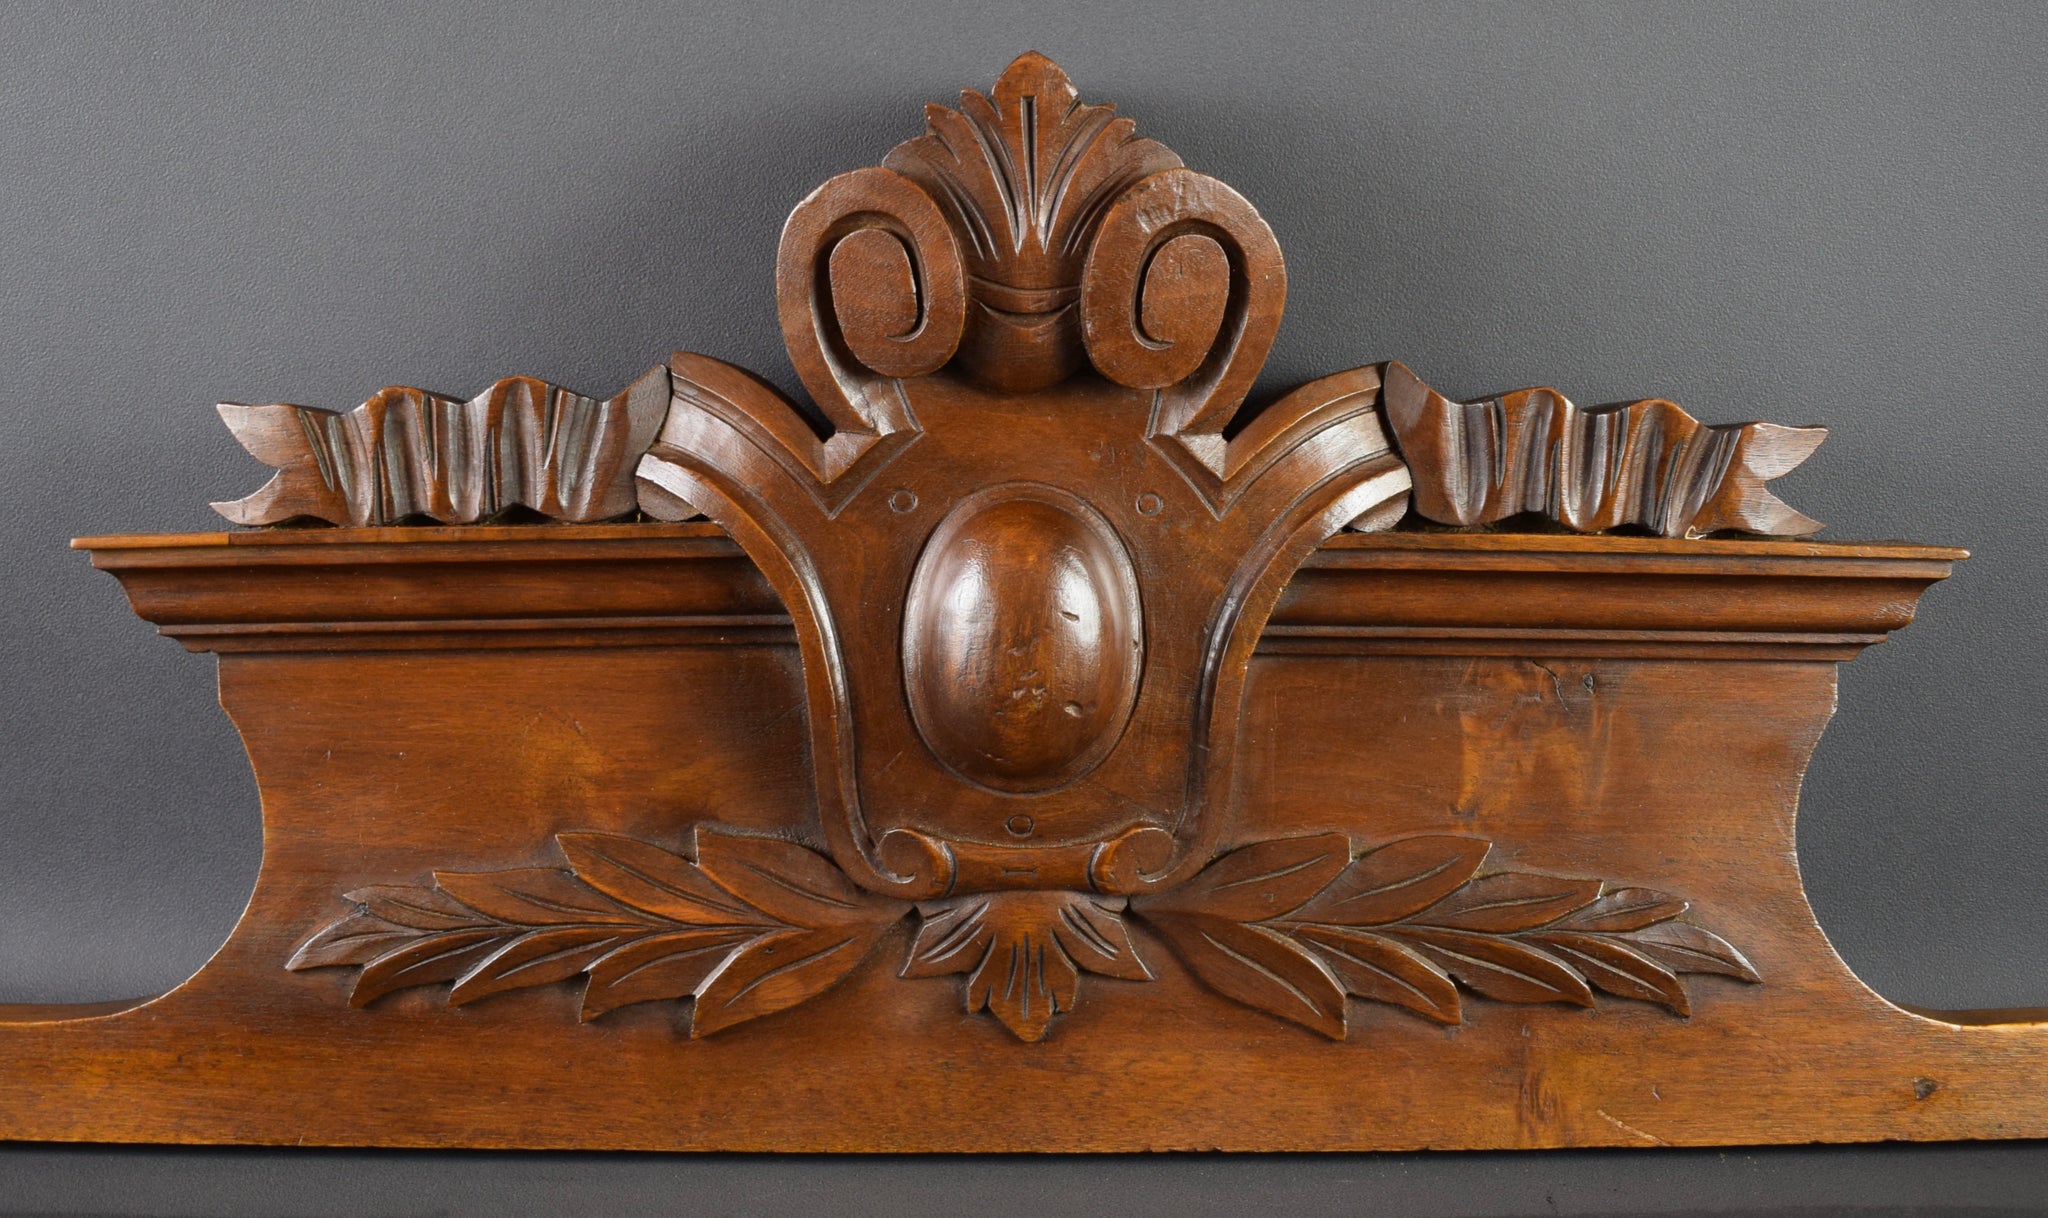 Antique French Carved Wood Pediment - Antique Architectural Salvage Furniture - Above Door Decor - Louis XVI style